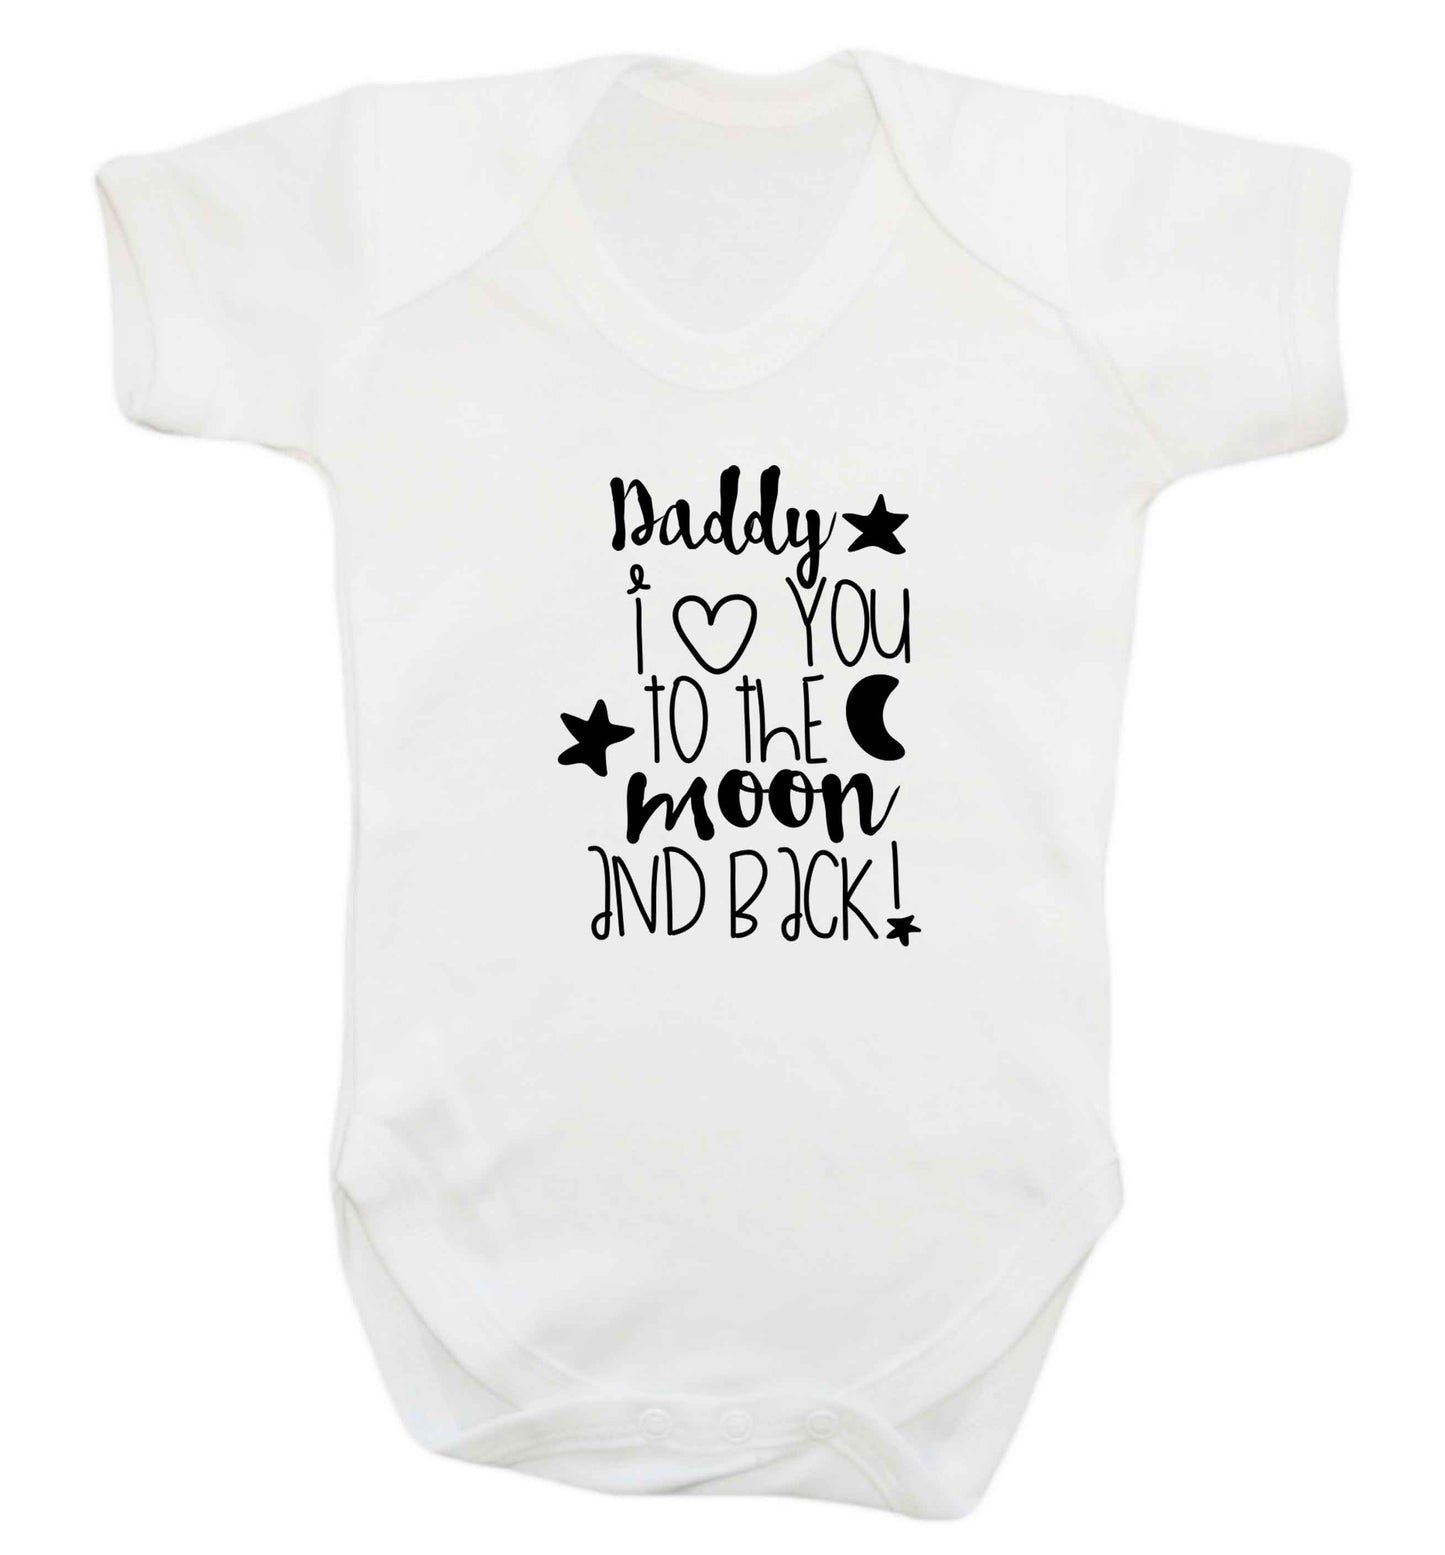 Daddy I love you to the moon and back baby vest white 18-24 months